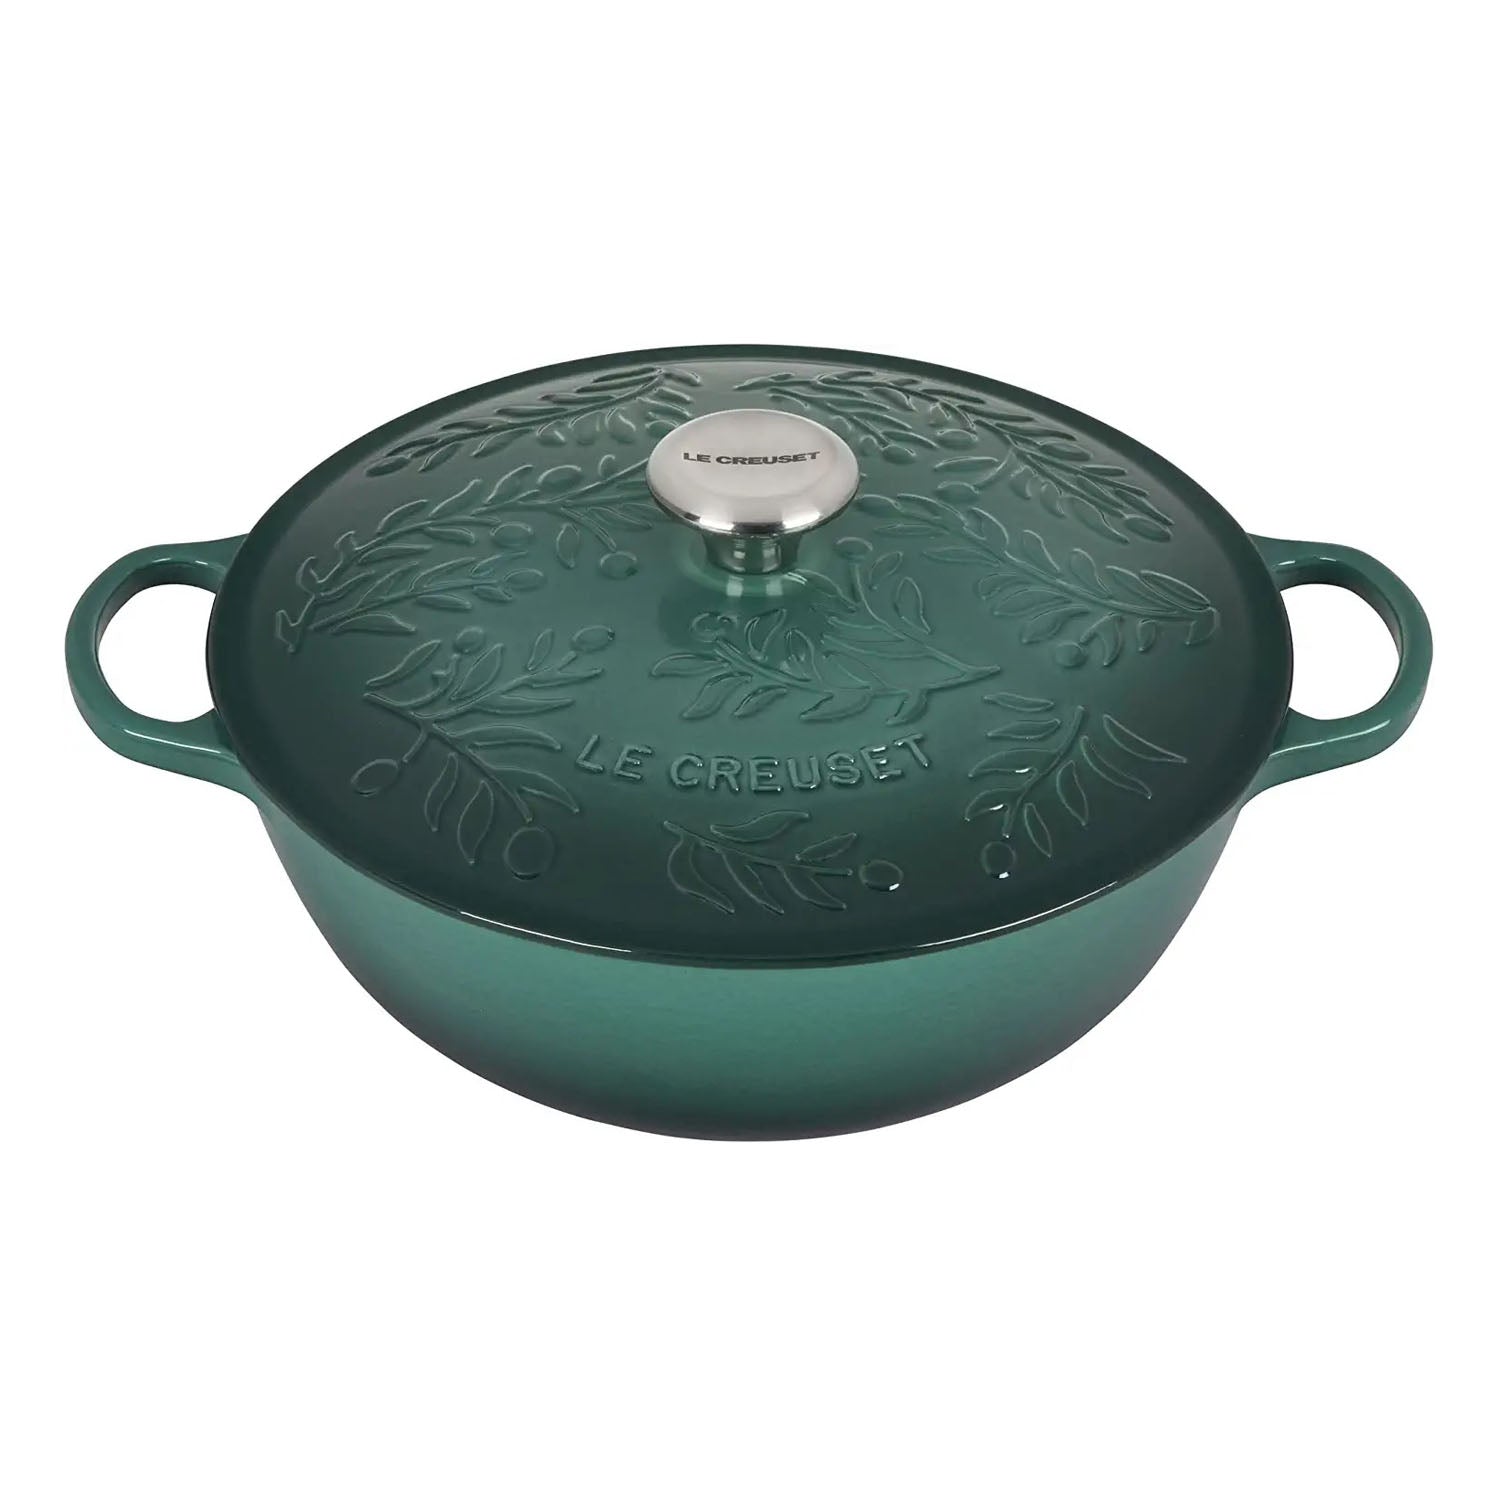 Would it be worth getting a Le Creuset soup pot if I already have